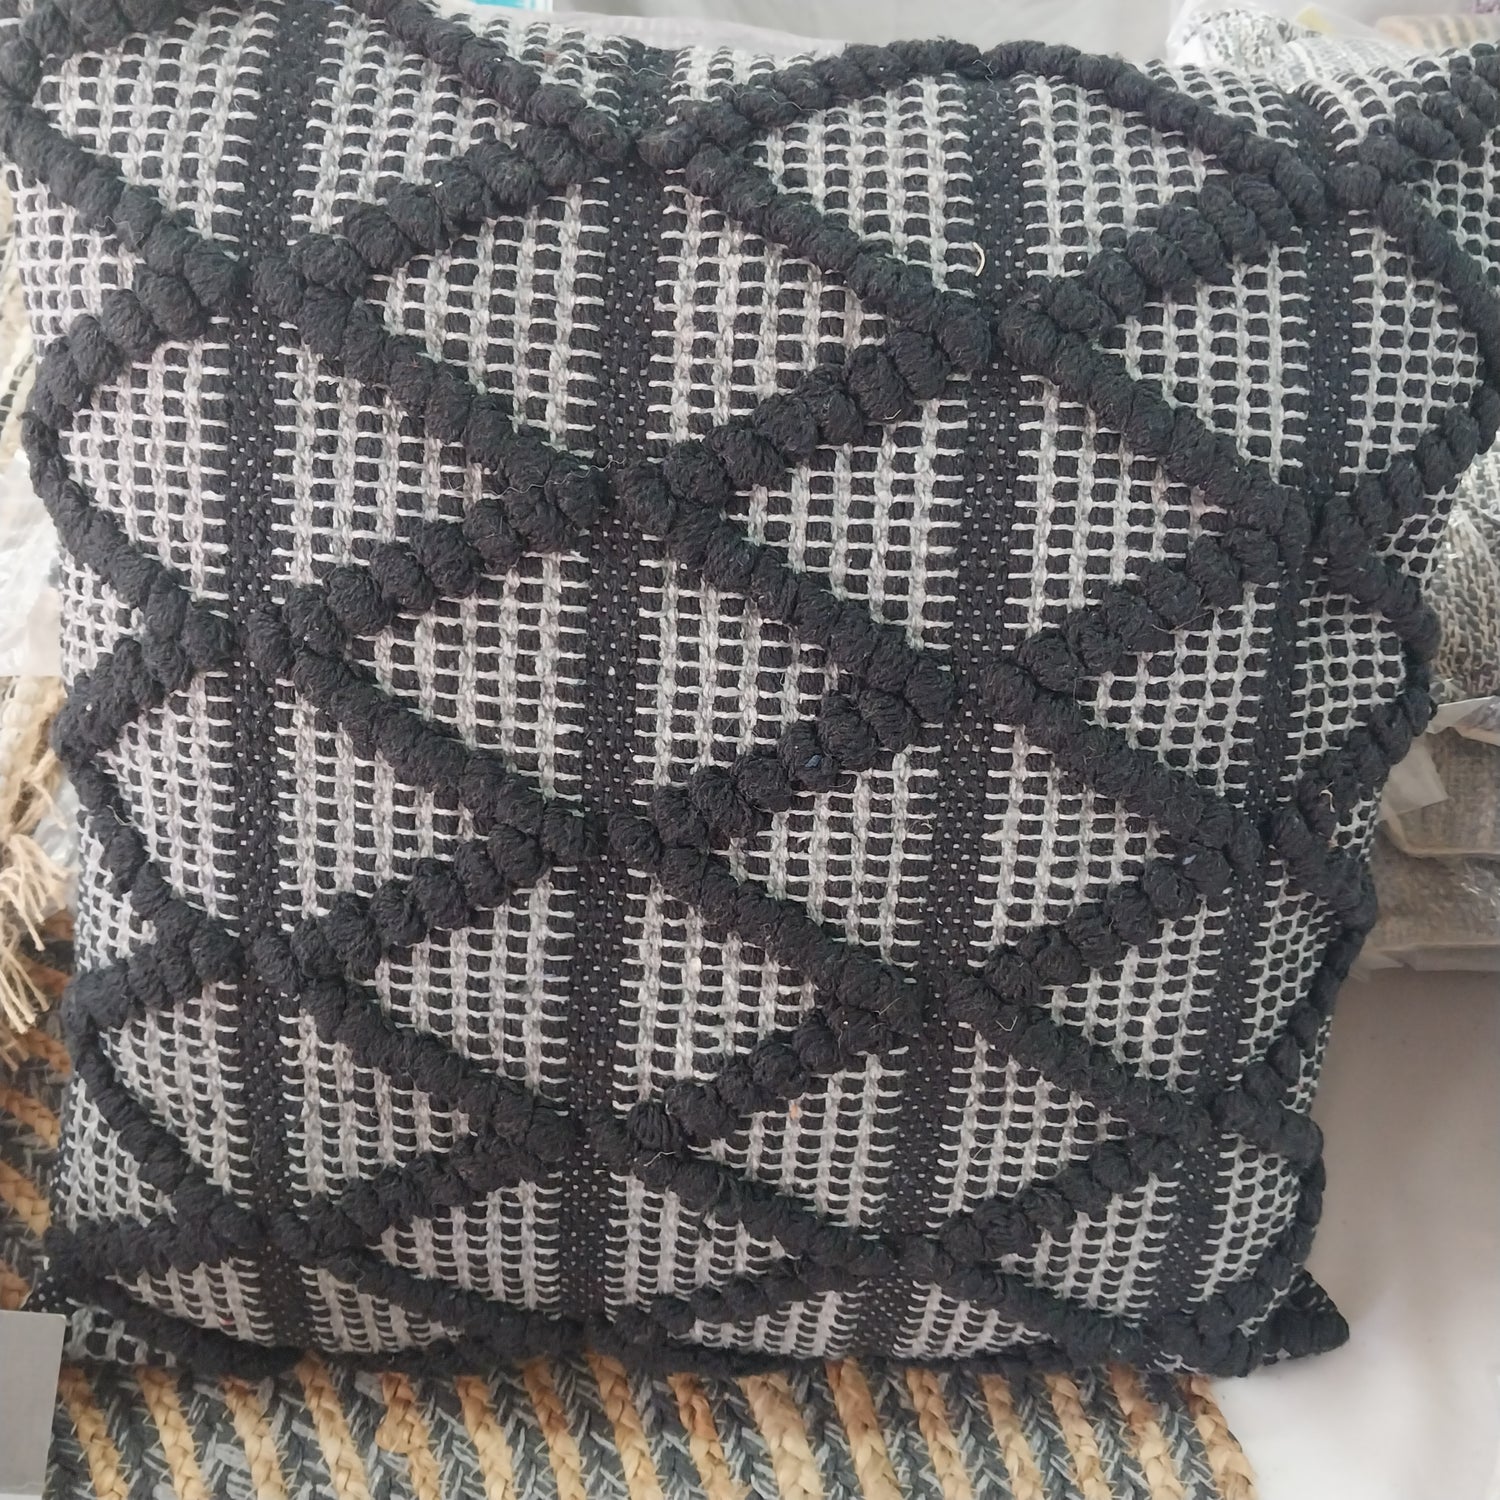 Cushions (4 pieces) - 45cm x 45cm - Vacuum Sealed and Filled